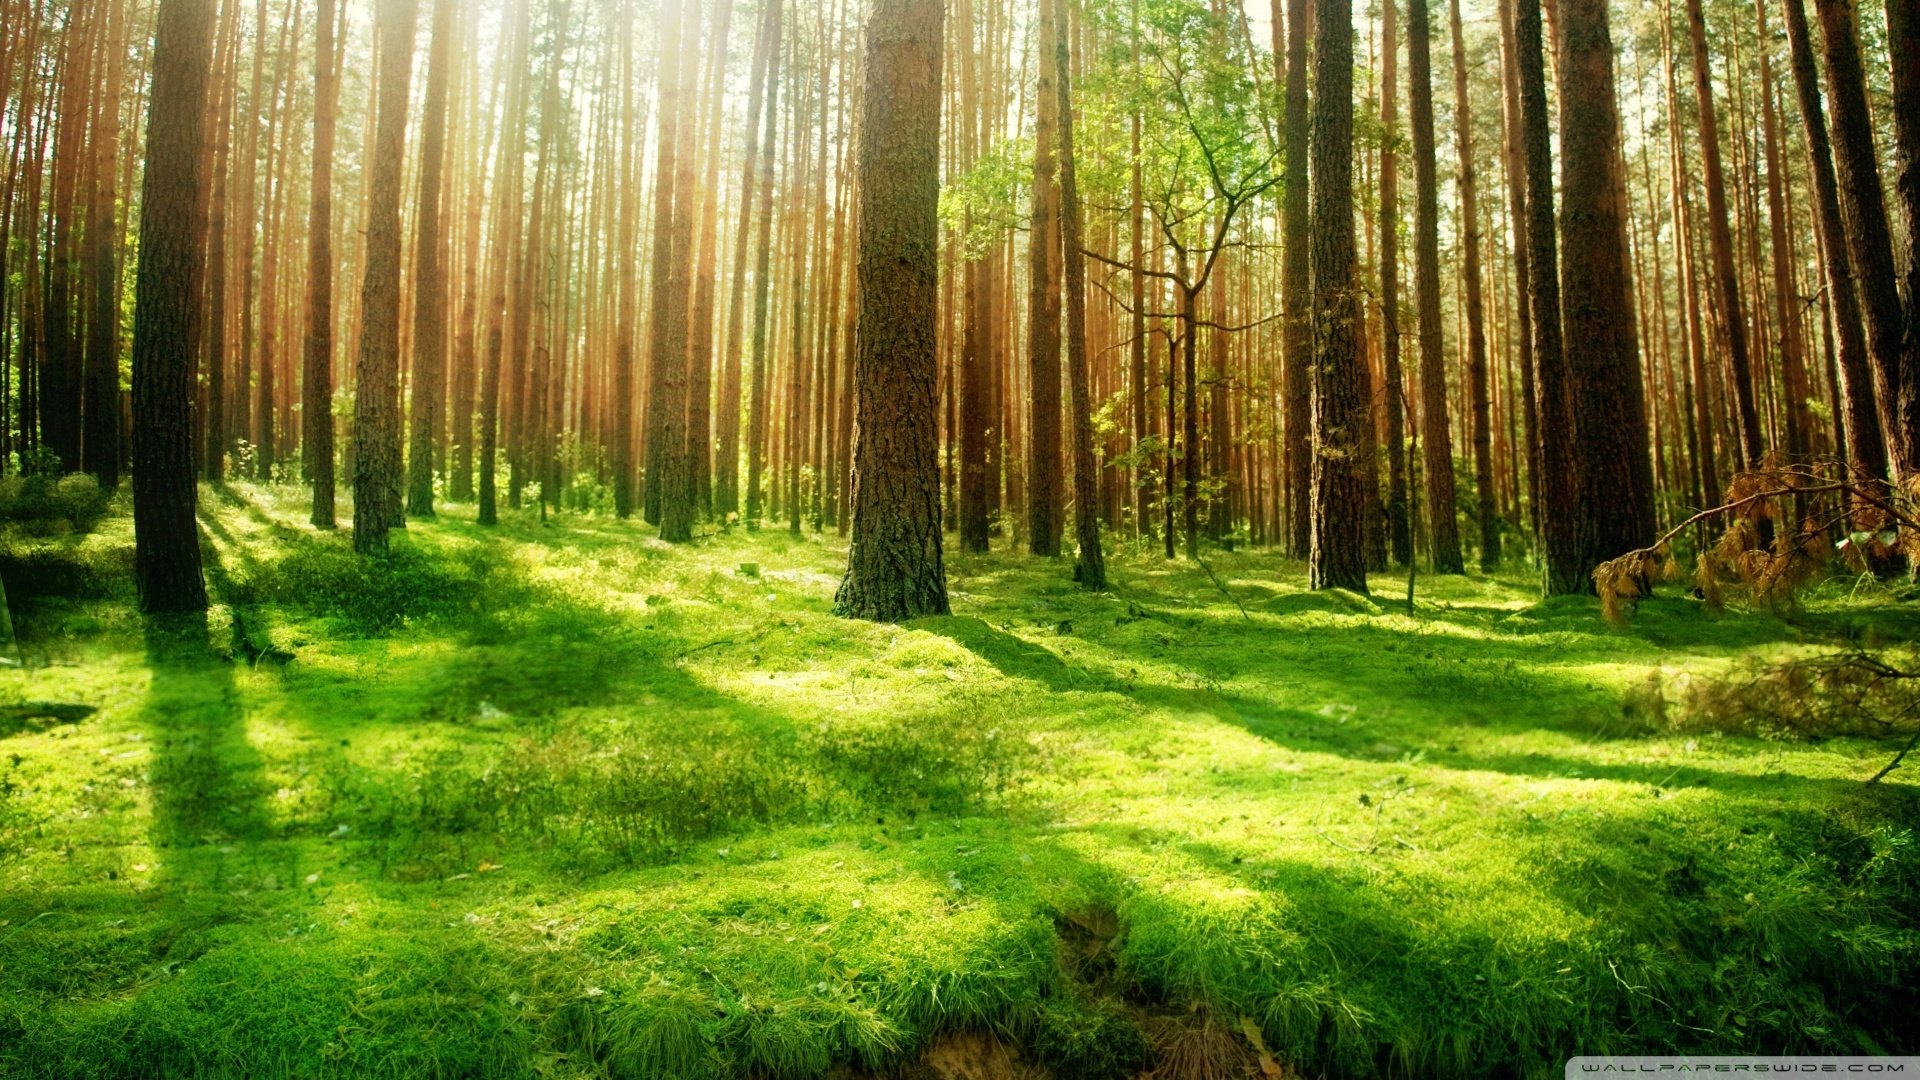  Forest Scenery Wallpaper 1920x1080 Beautiful Forest Scenery